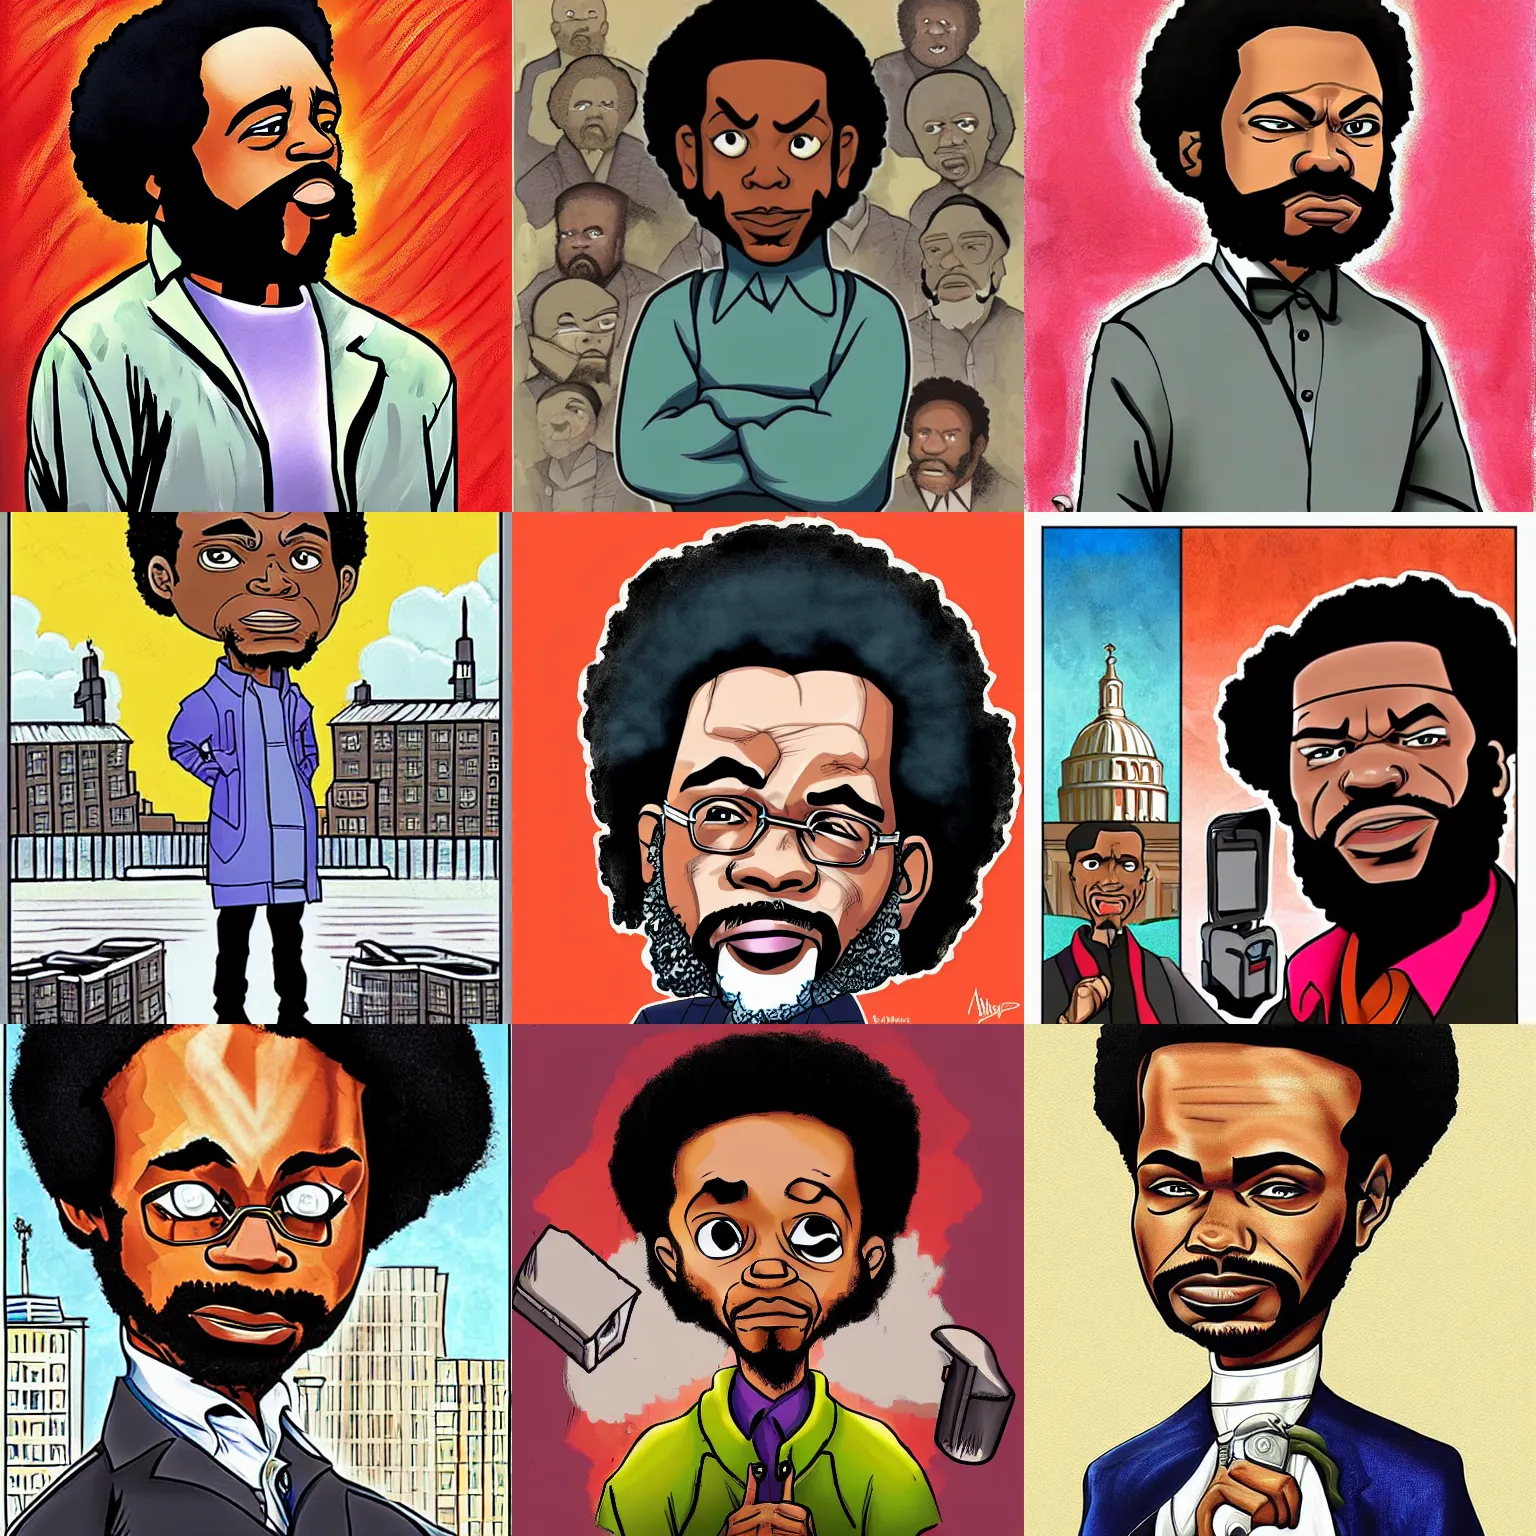 Prompt: Karl marx painting by Aaron McGruder in the style of the boondocks